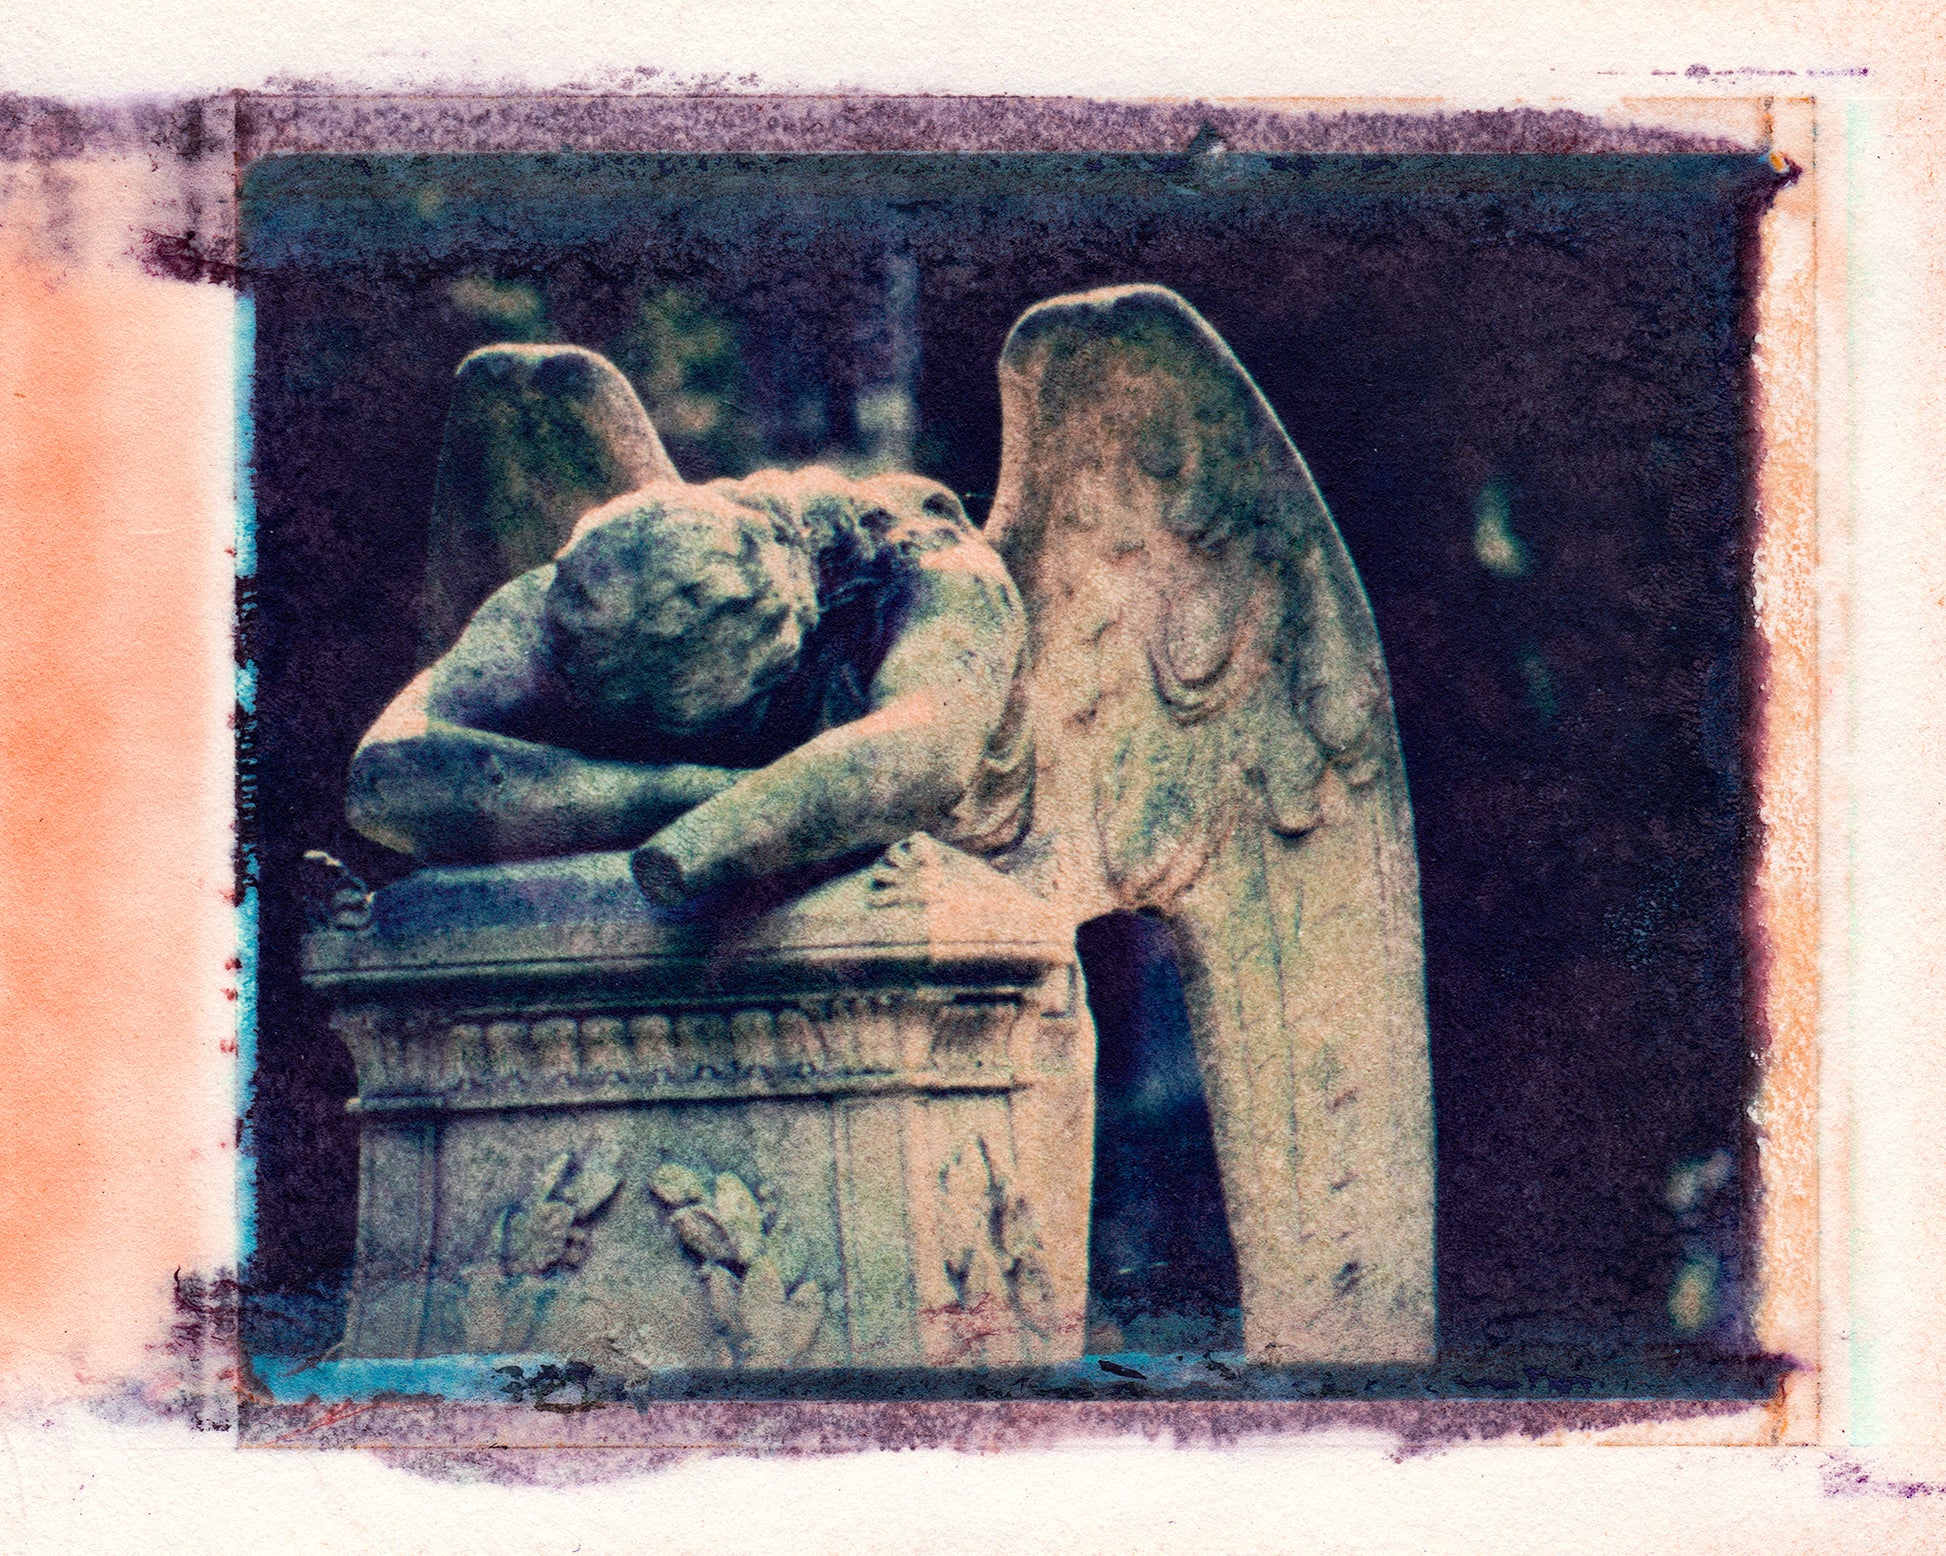 Polaroid transfer of sculpture of angel leaning over a grave, lamenting, in cemetery, angel's left hand has been knocked off